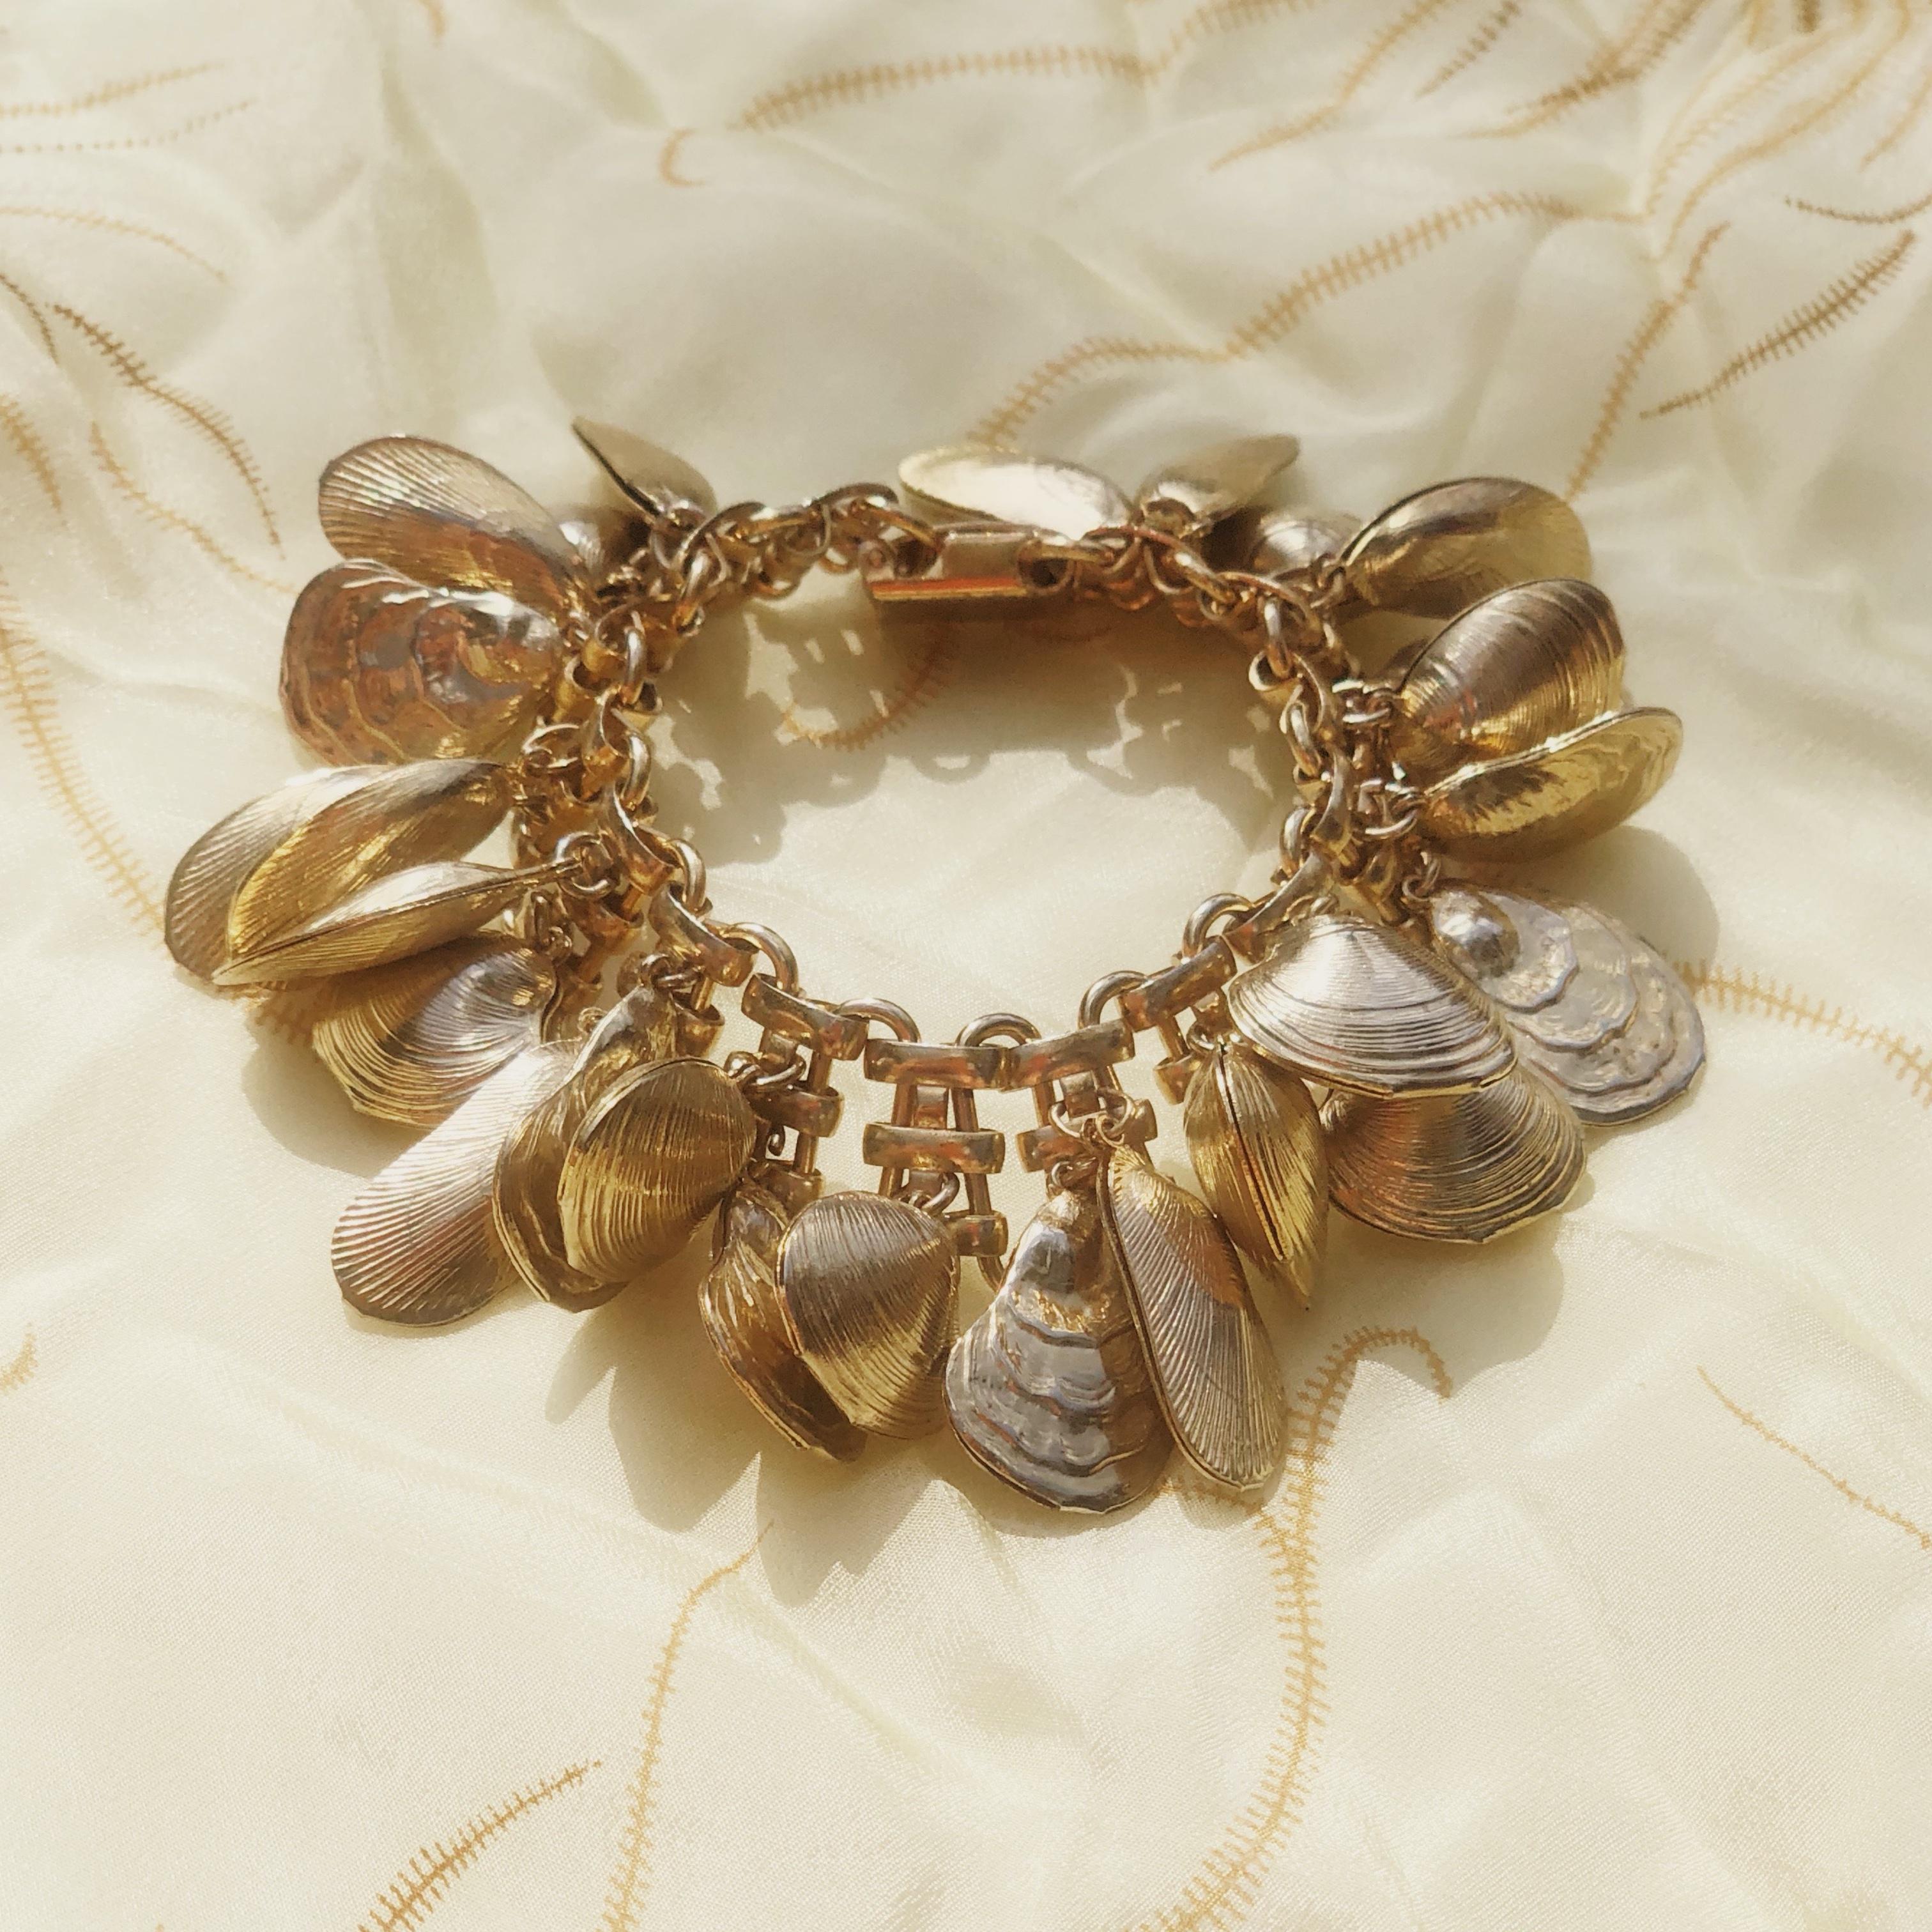 This rare and iconic Napier shell charm bracelet, designed by Eugene Bertolli, is a favorite among vintage jewelry collectors.  A cluster of three dimensional gold plated seashells jingle and jangle with every move you make - a wonderful piece for